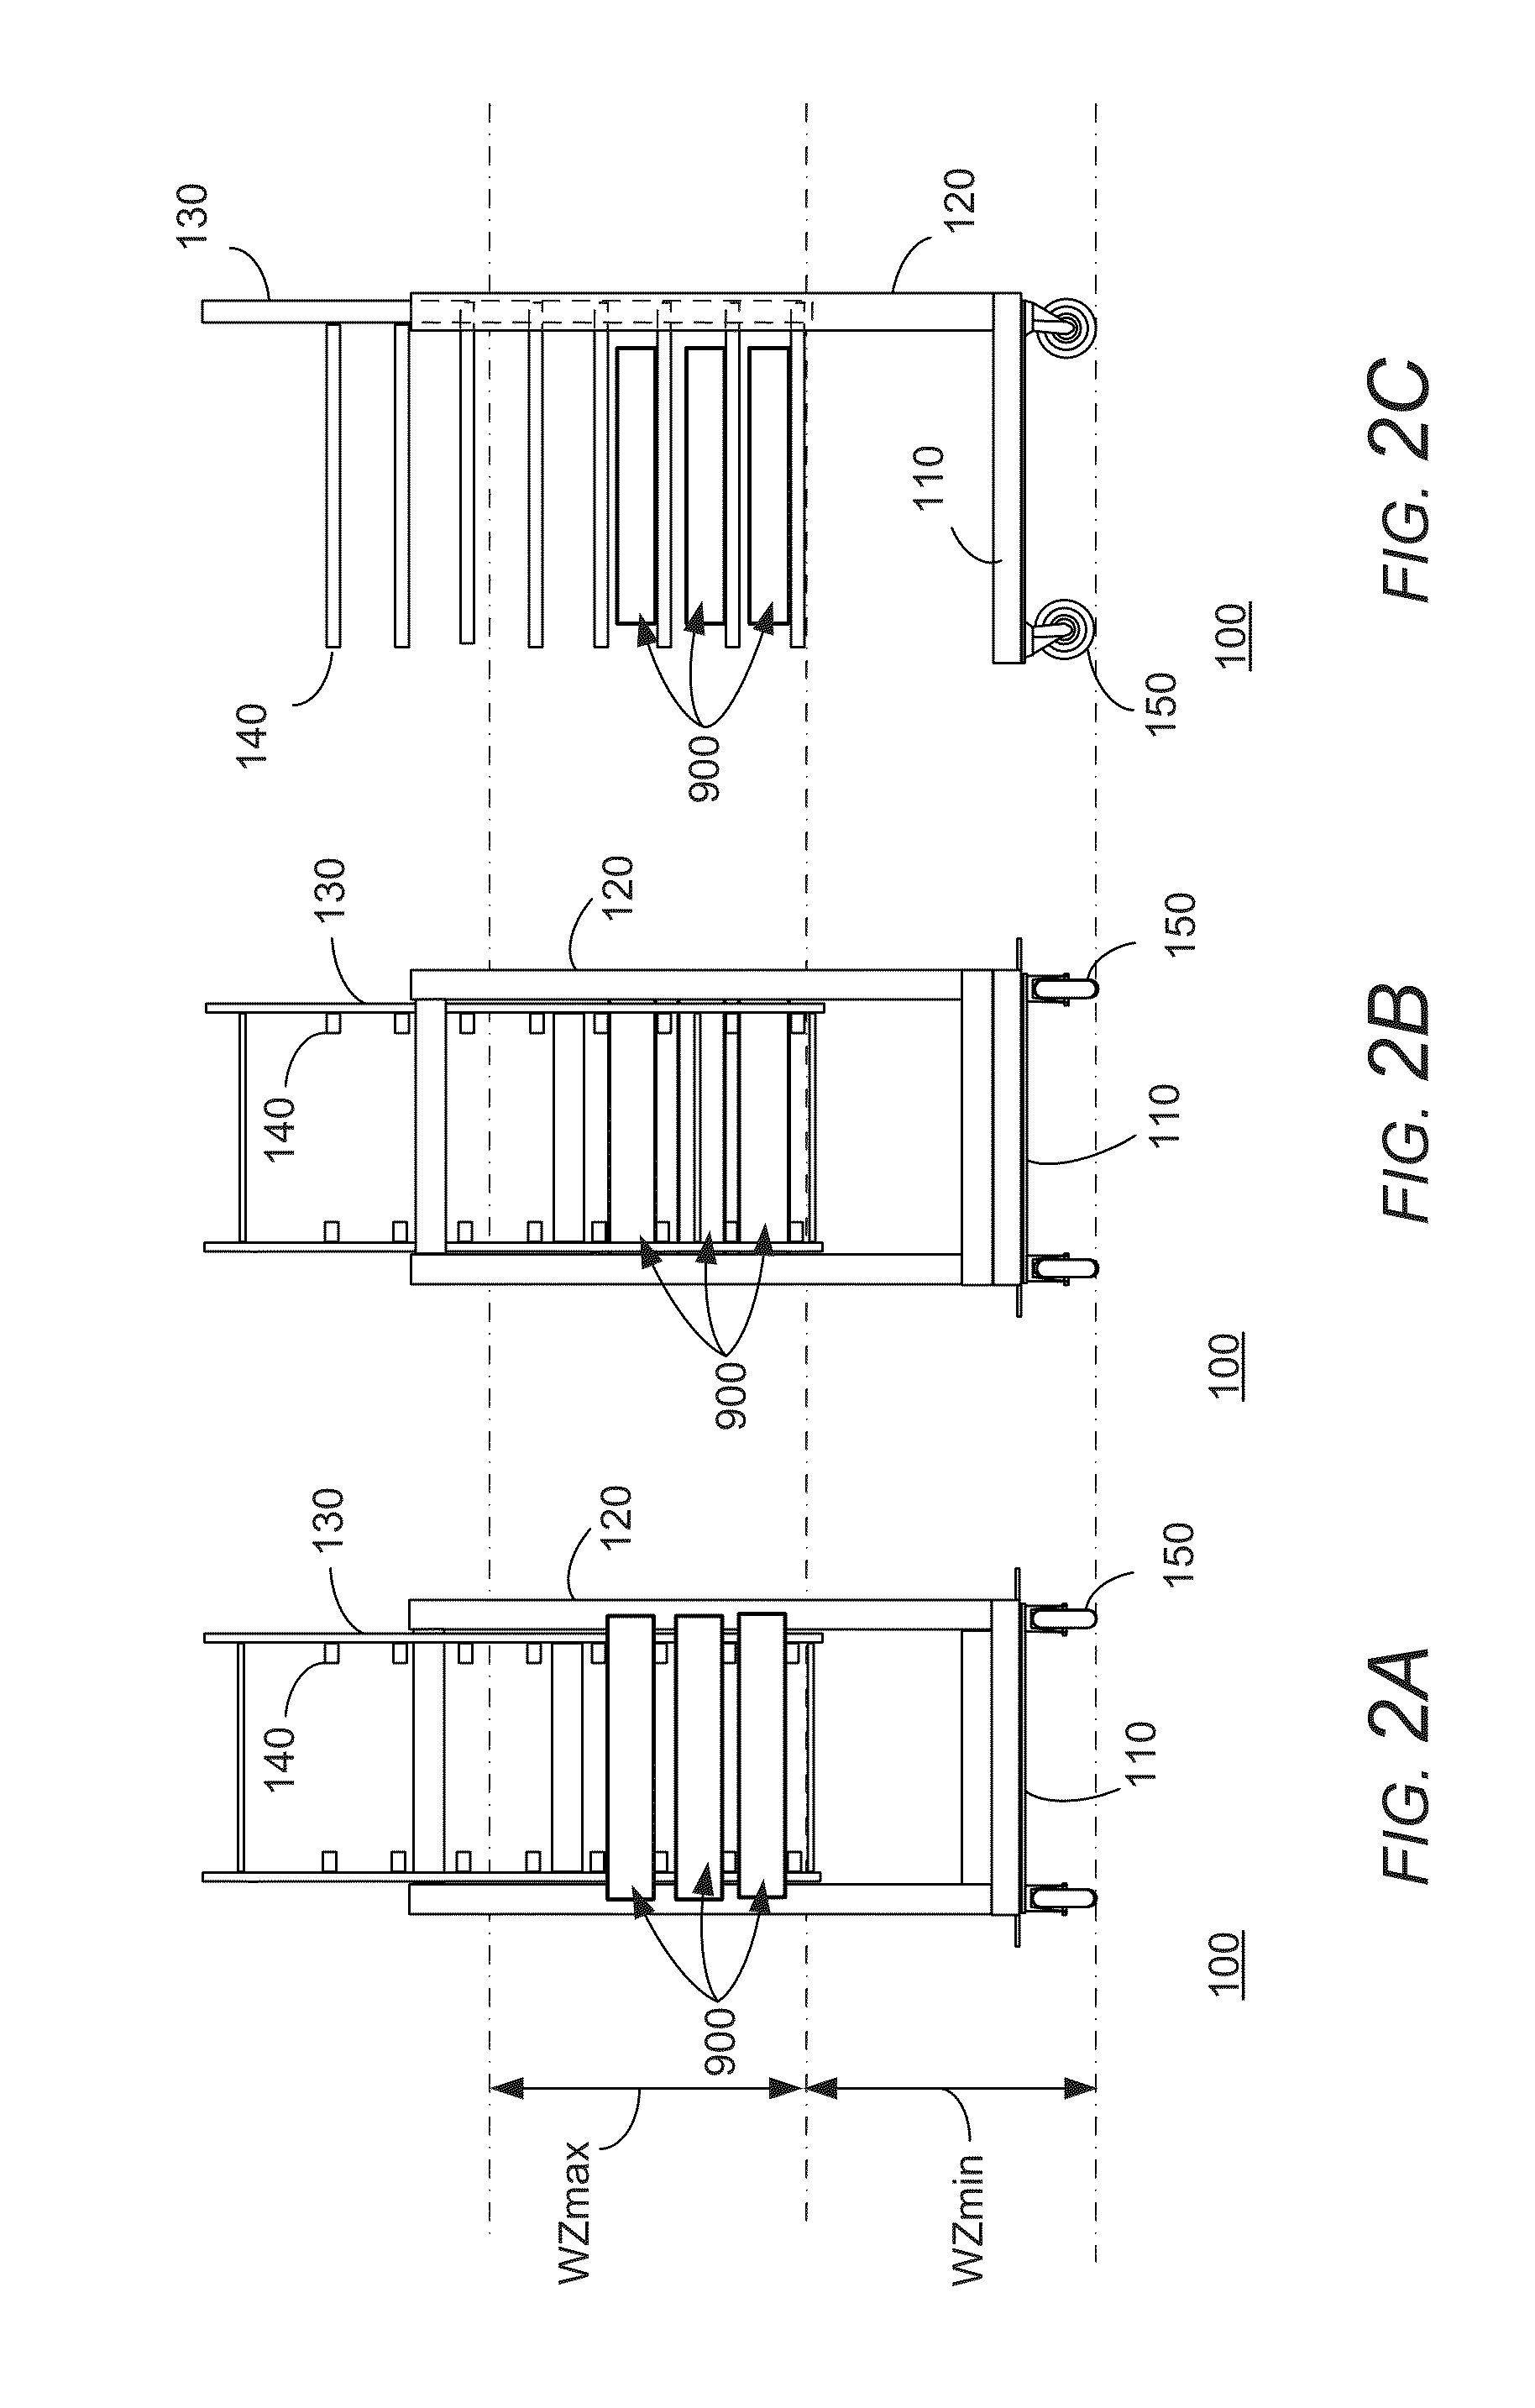 Self-elevating and self-lowering assembly cart for transporting a household appliance assembly component